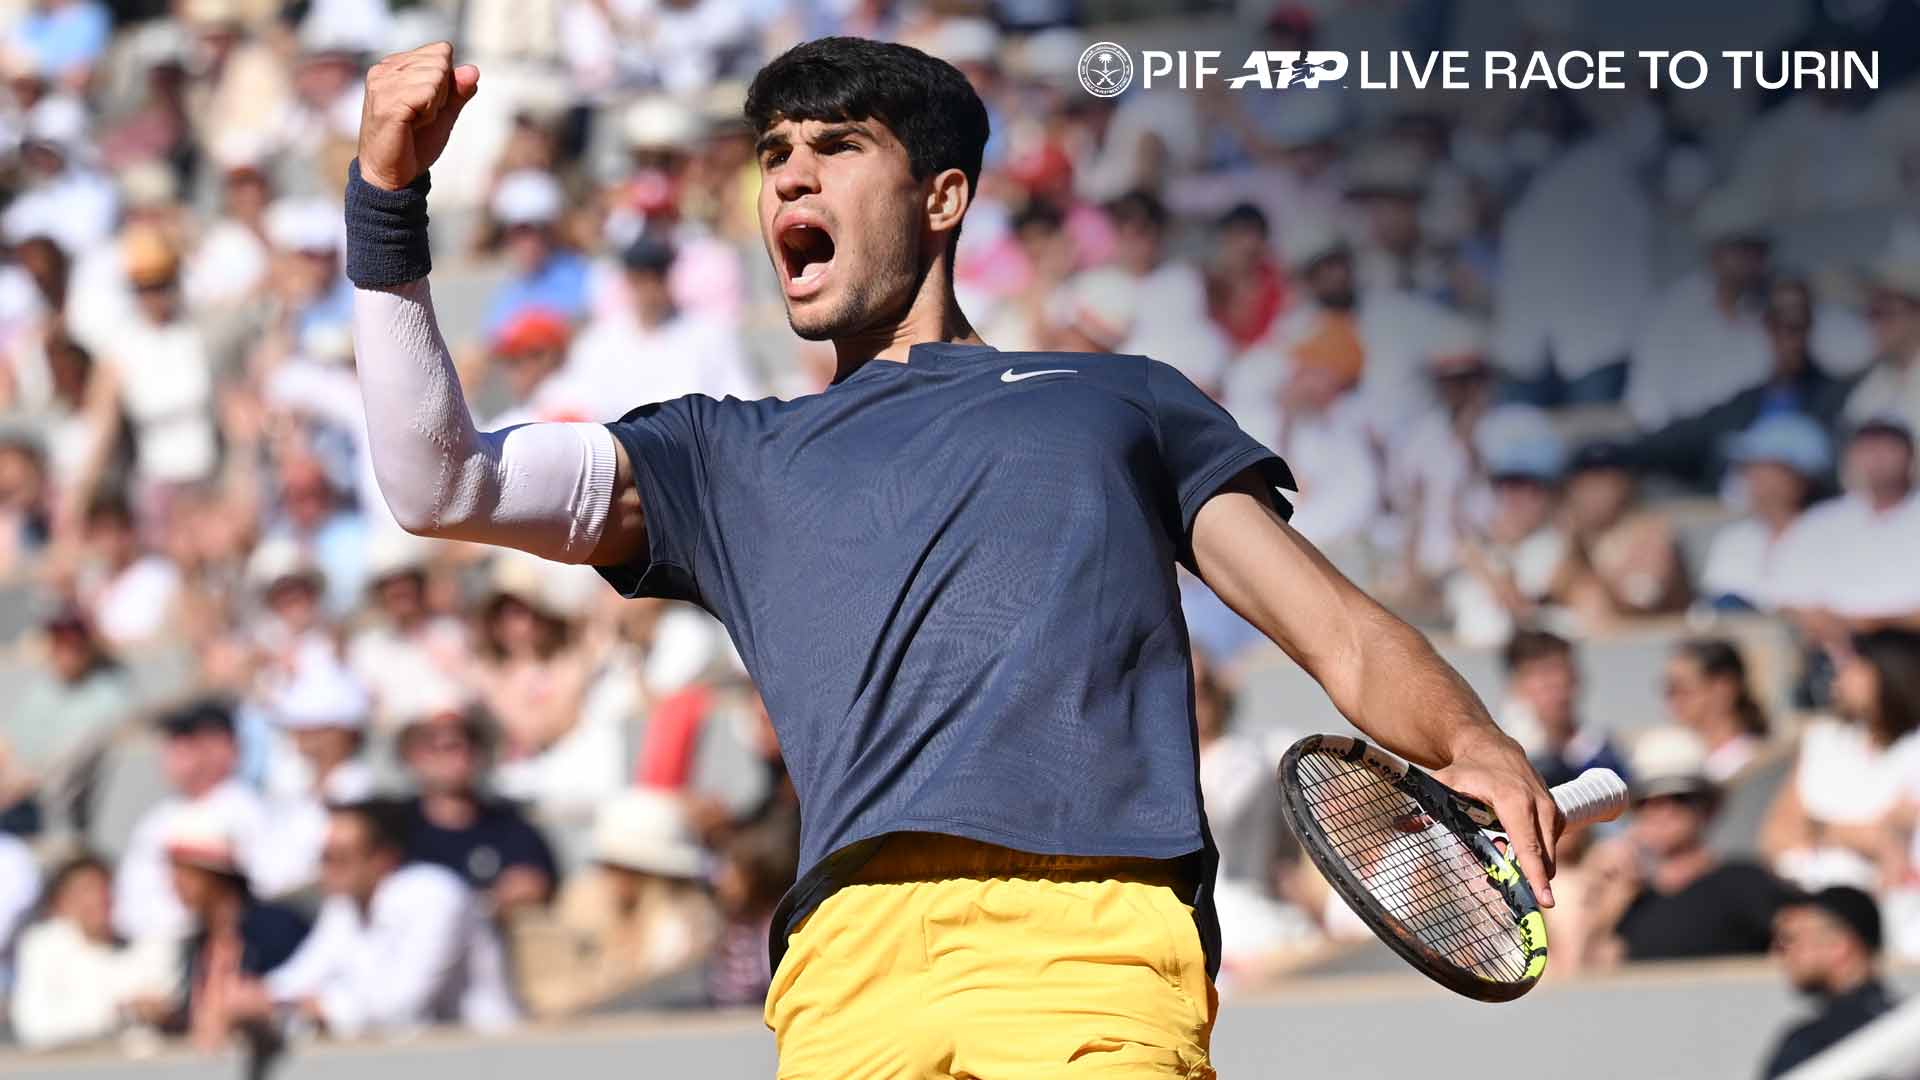 Carlos Alcaraz is now third in the PIF ATP Live Race To Turin after winning the Roland Garros title.